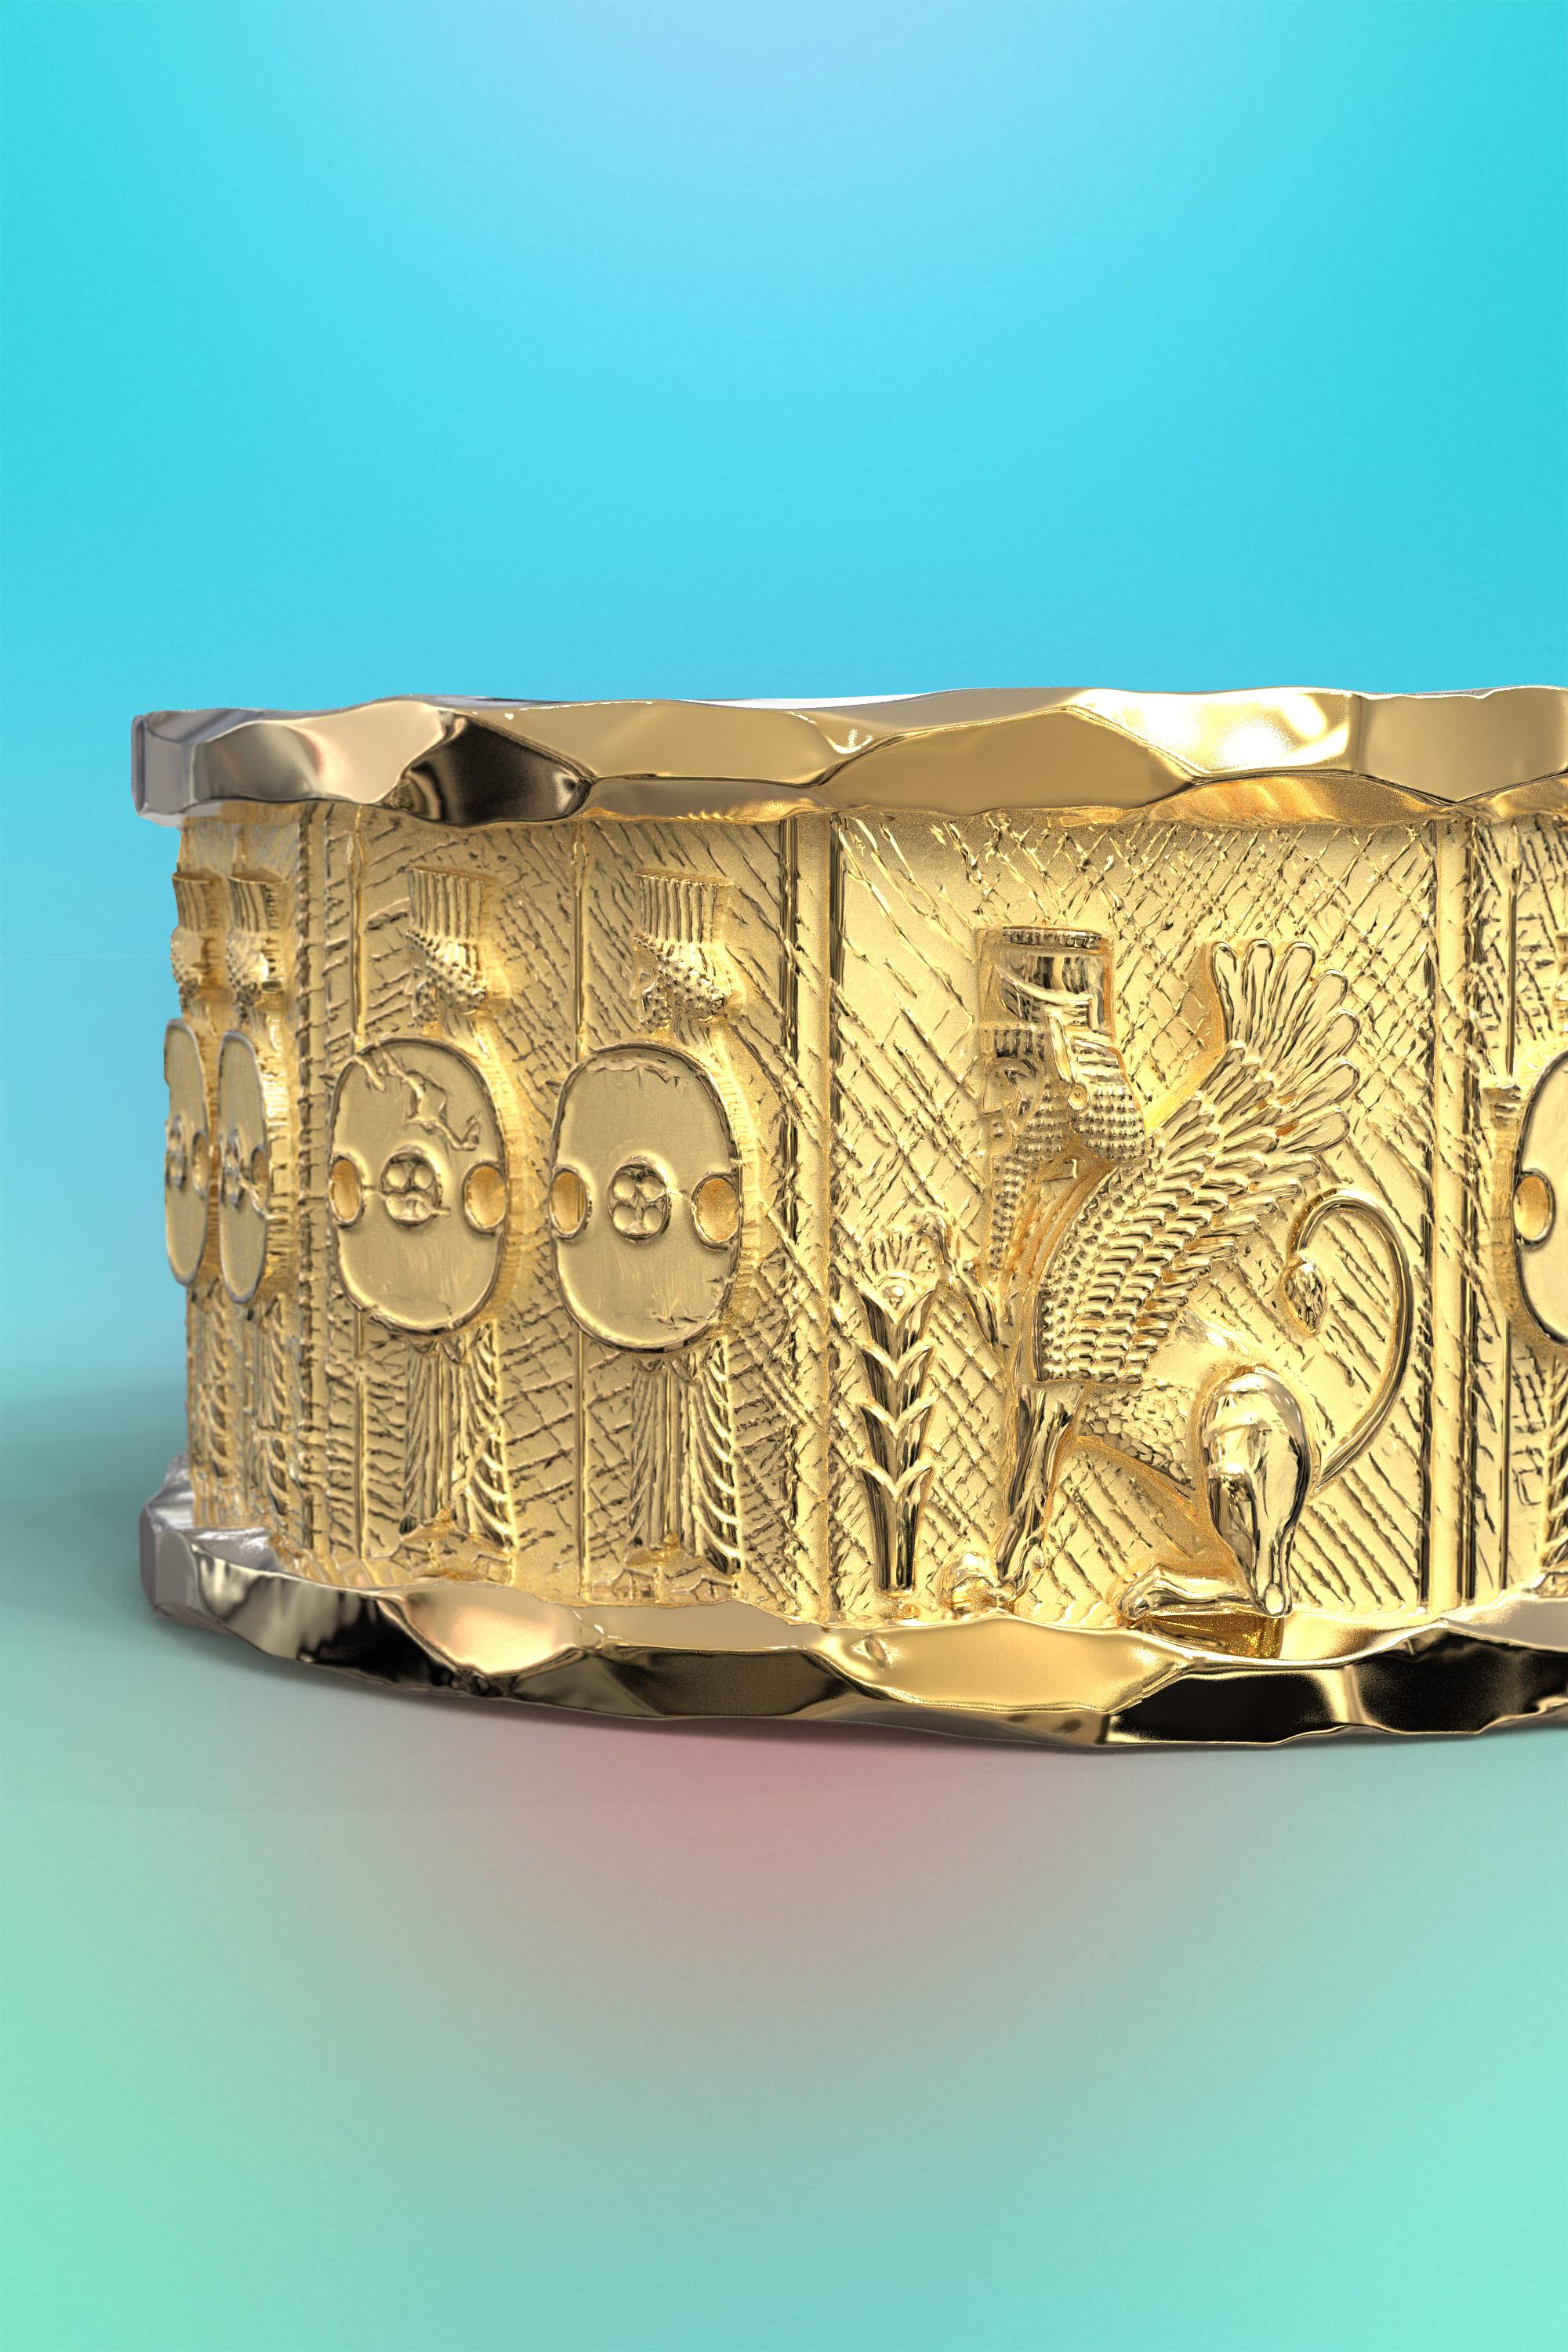 For Sale:  Italian 14k Gold Ring with Temple of Persepolis Bas-Reliefs, Persian Style Ring  5